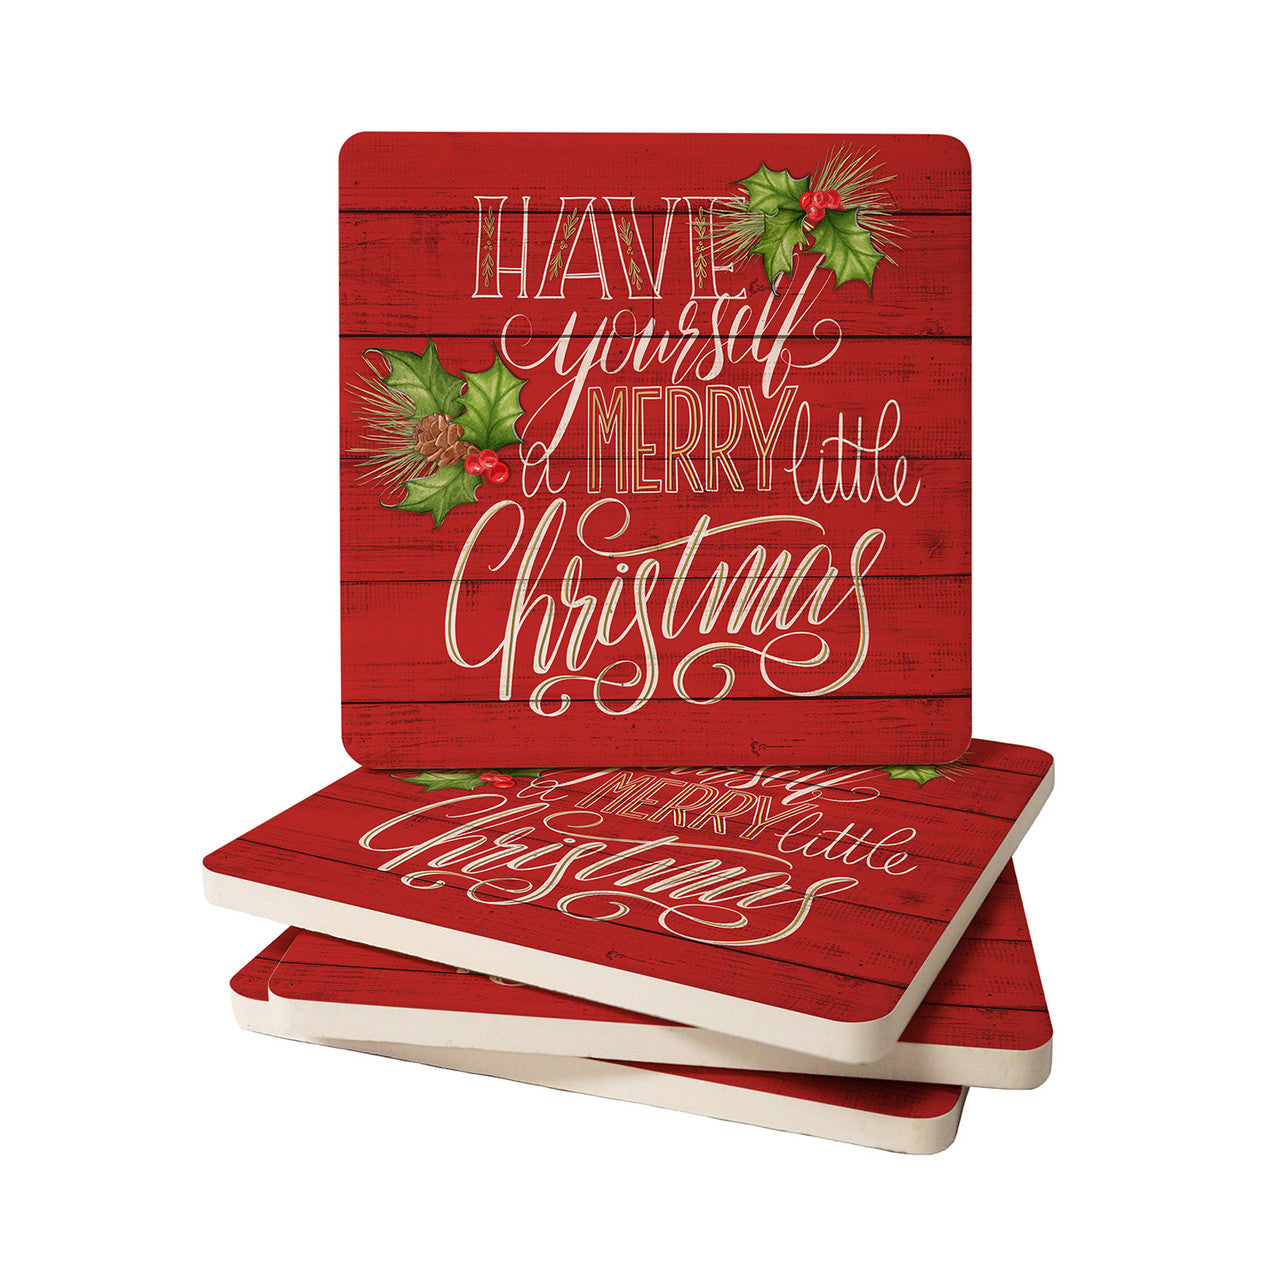 Have Yourself A Merry Little Christmas Coaster Set